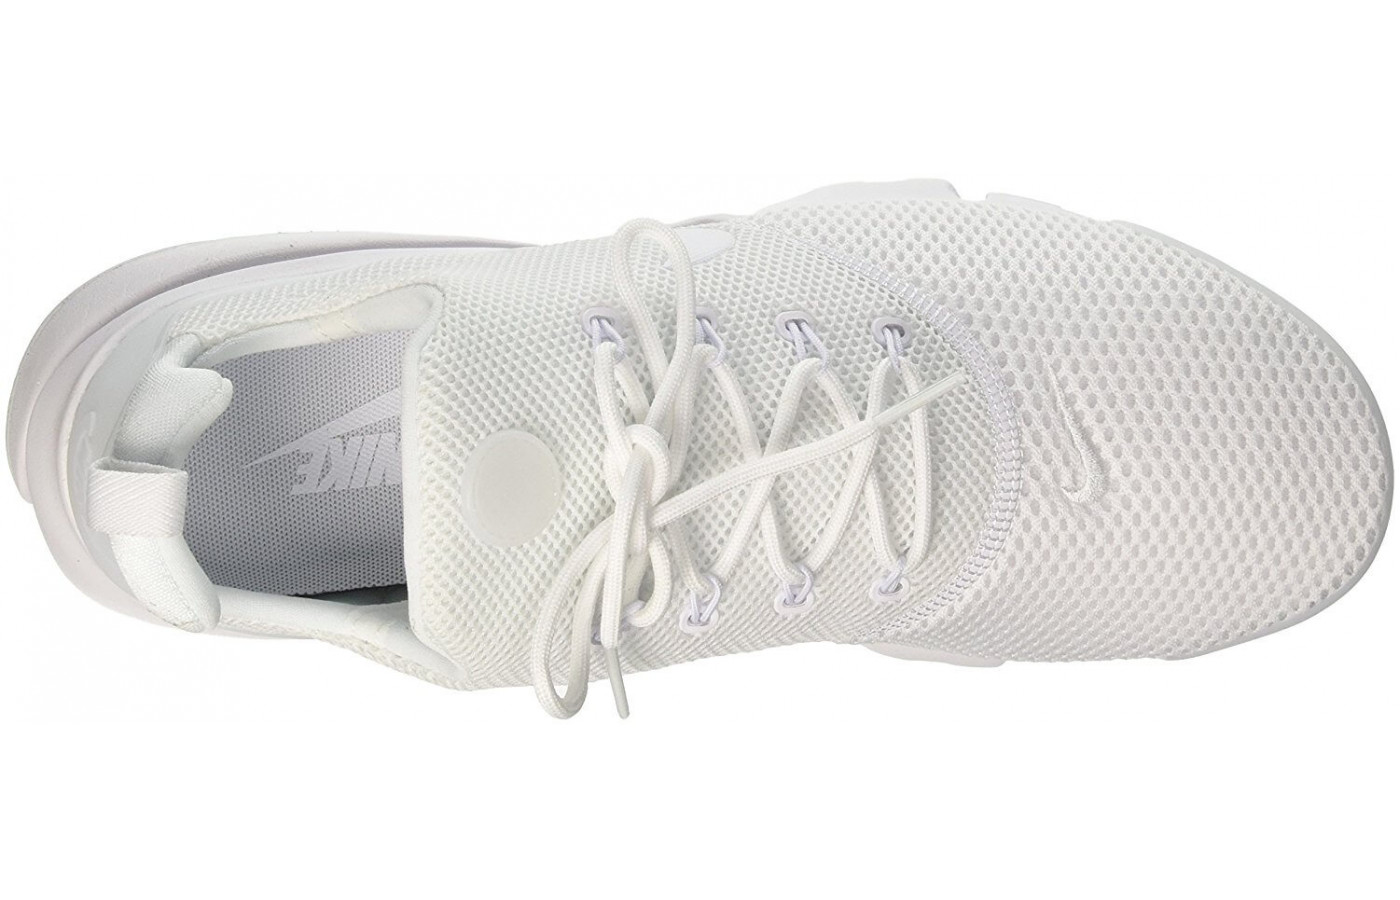 The breathable upper features a stretchy mesh. 